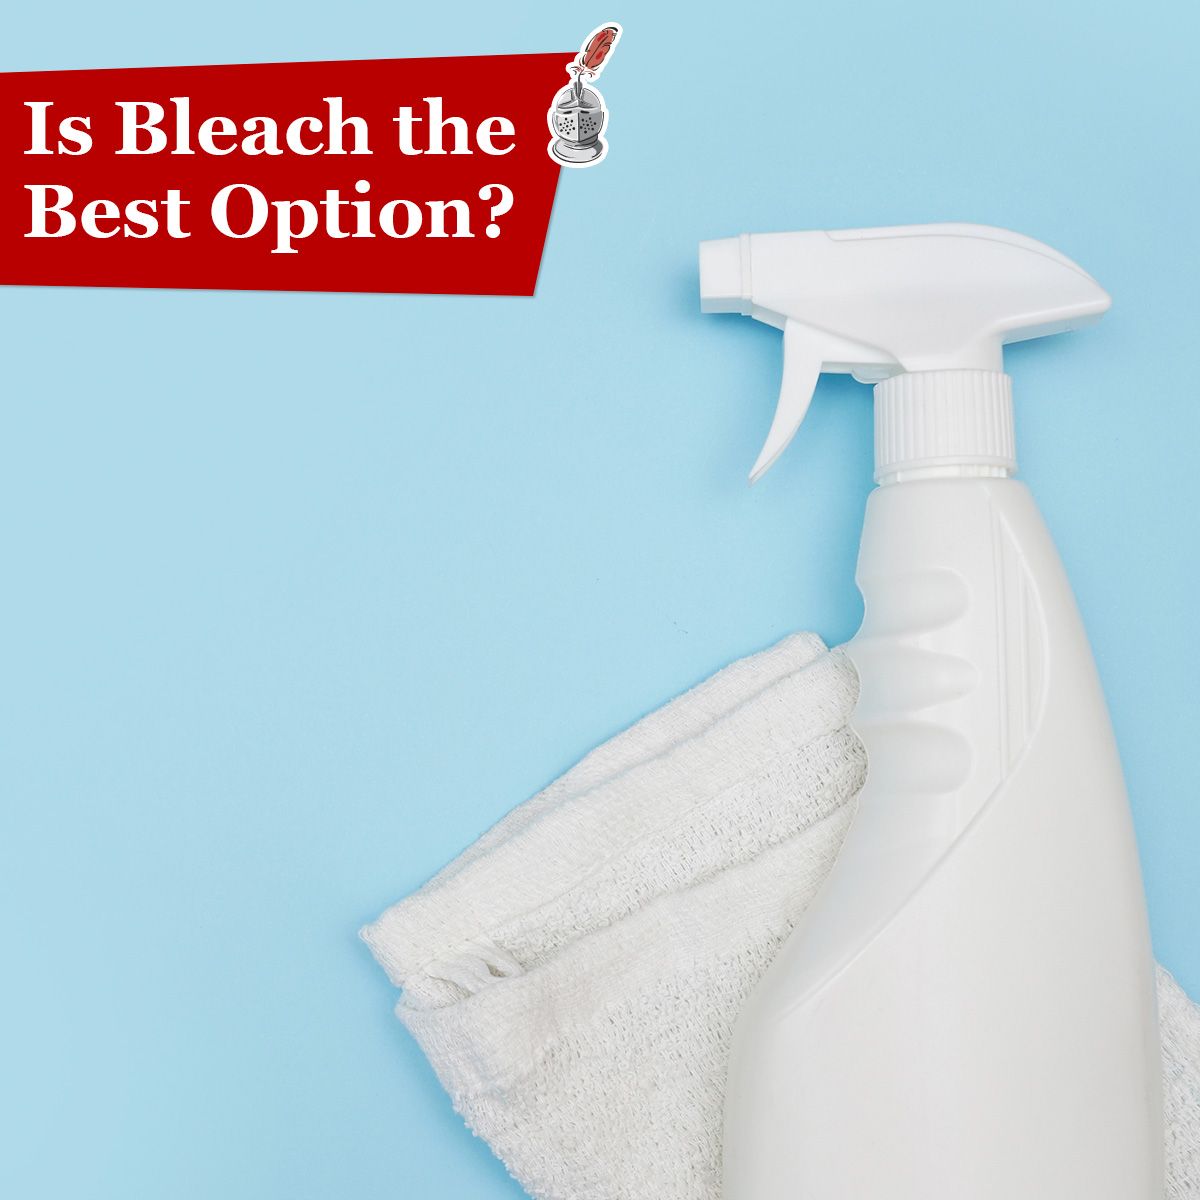 Is Bleach the Best Option?